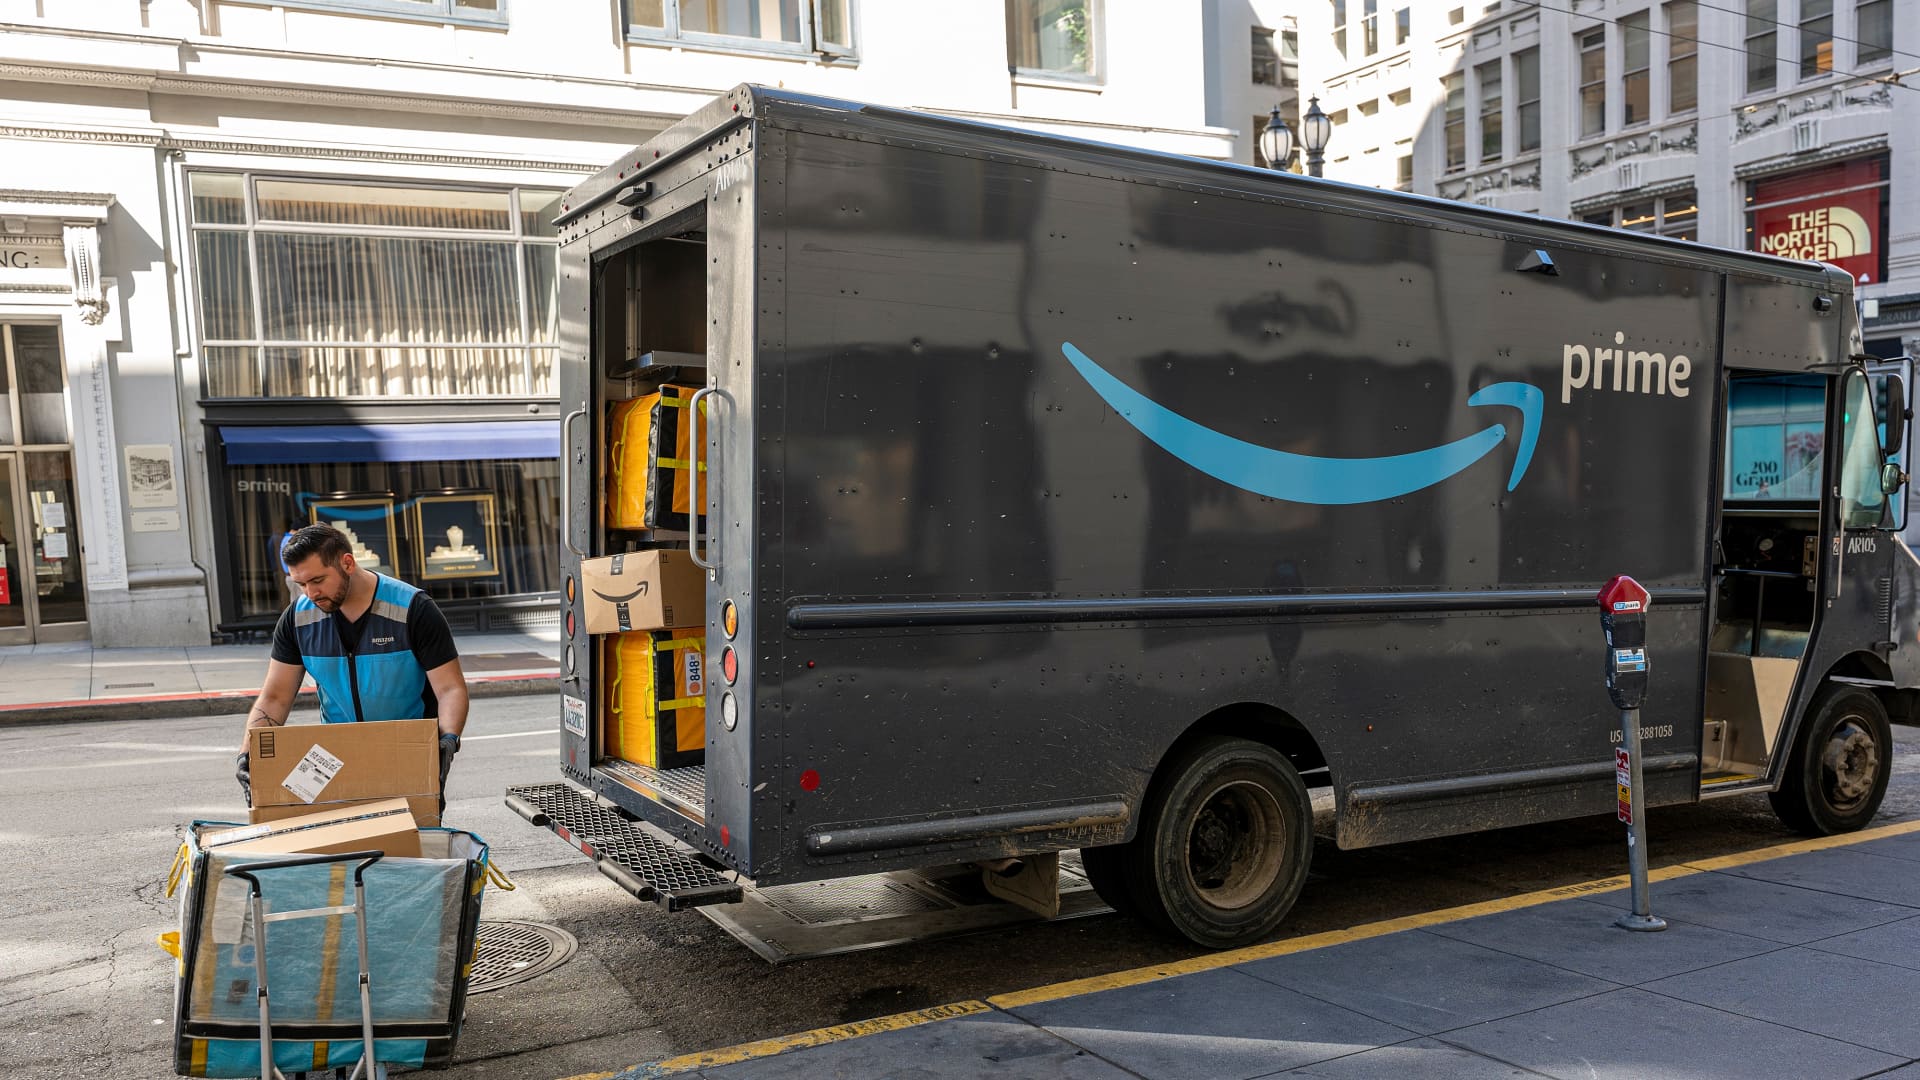 Amazon shoppers shrug off second Prime Day sale